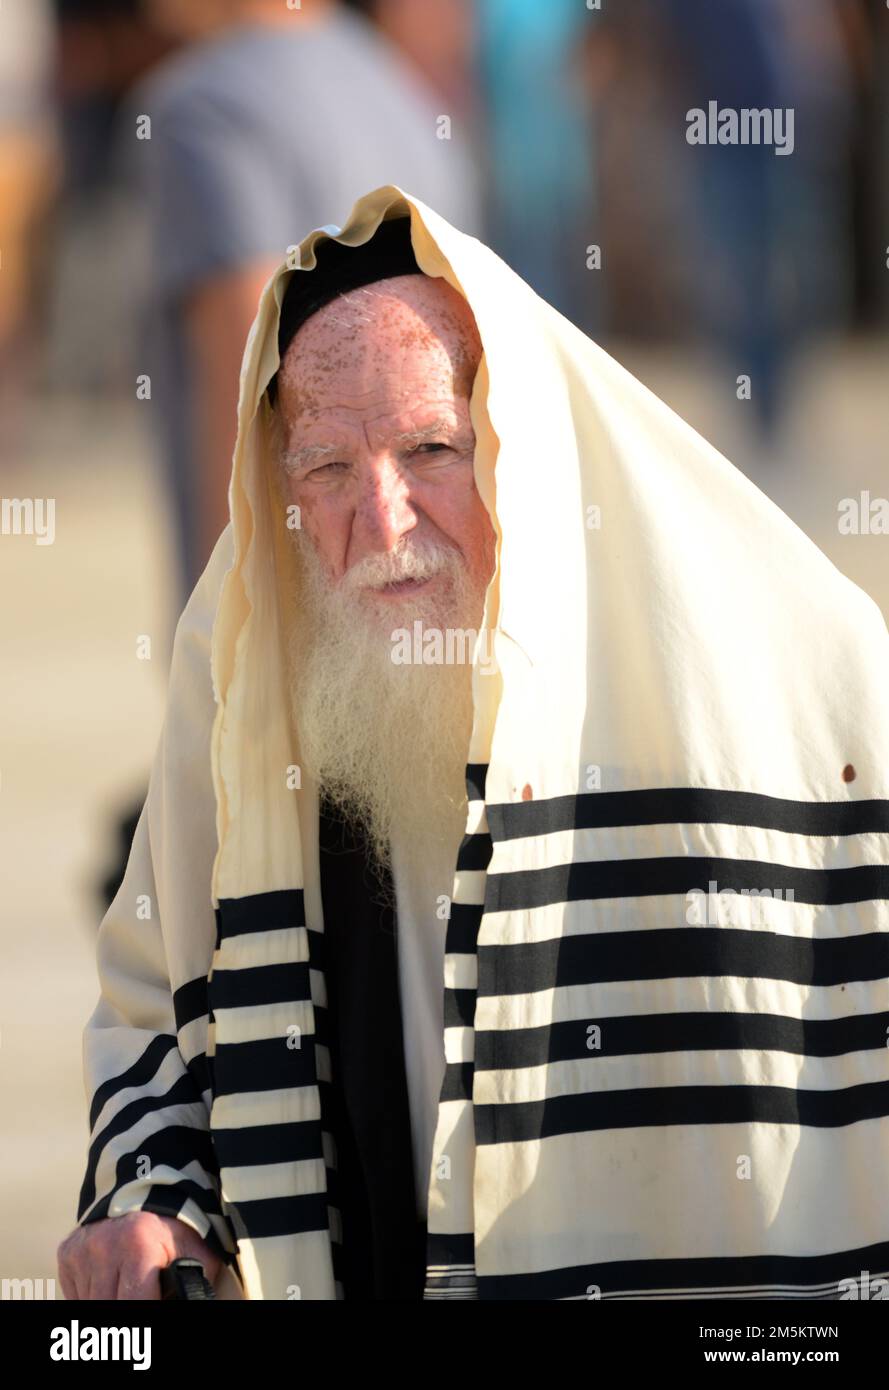 Portrait of a Jewish man taken by the Wailing Wall / Western Wall in the Jewish quarter in the old city of Jerusalem, Israel. Stock Photo